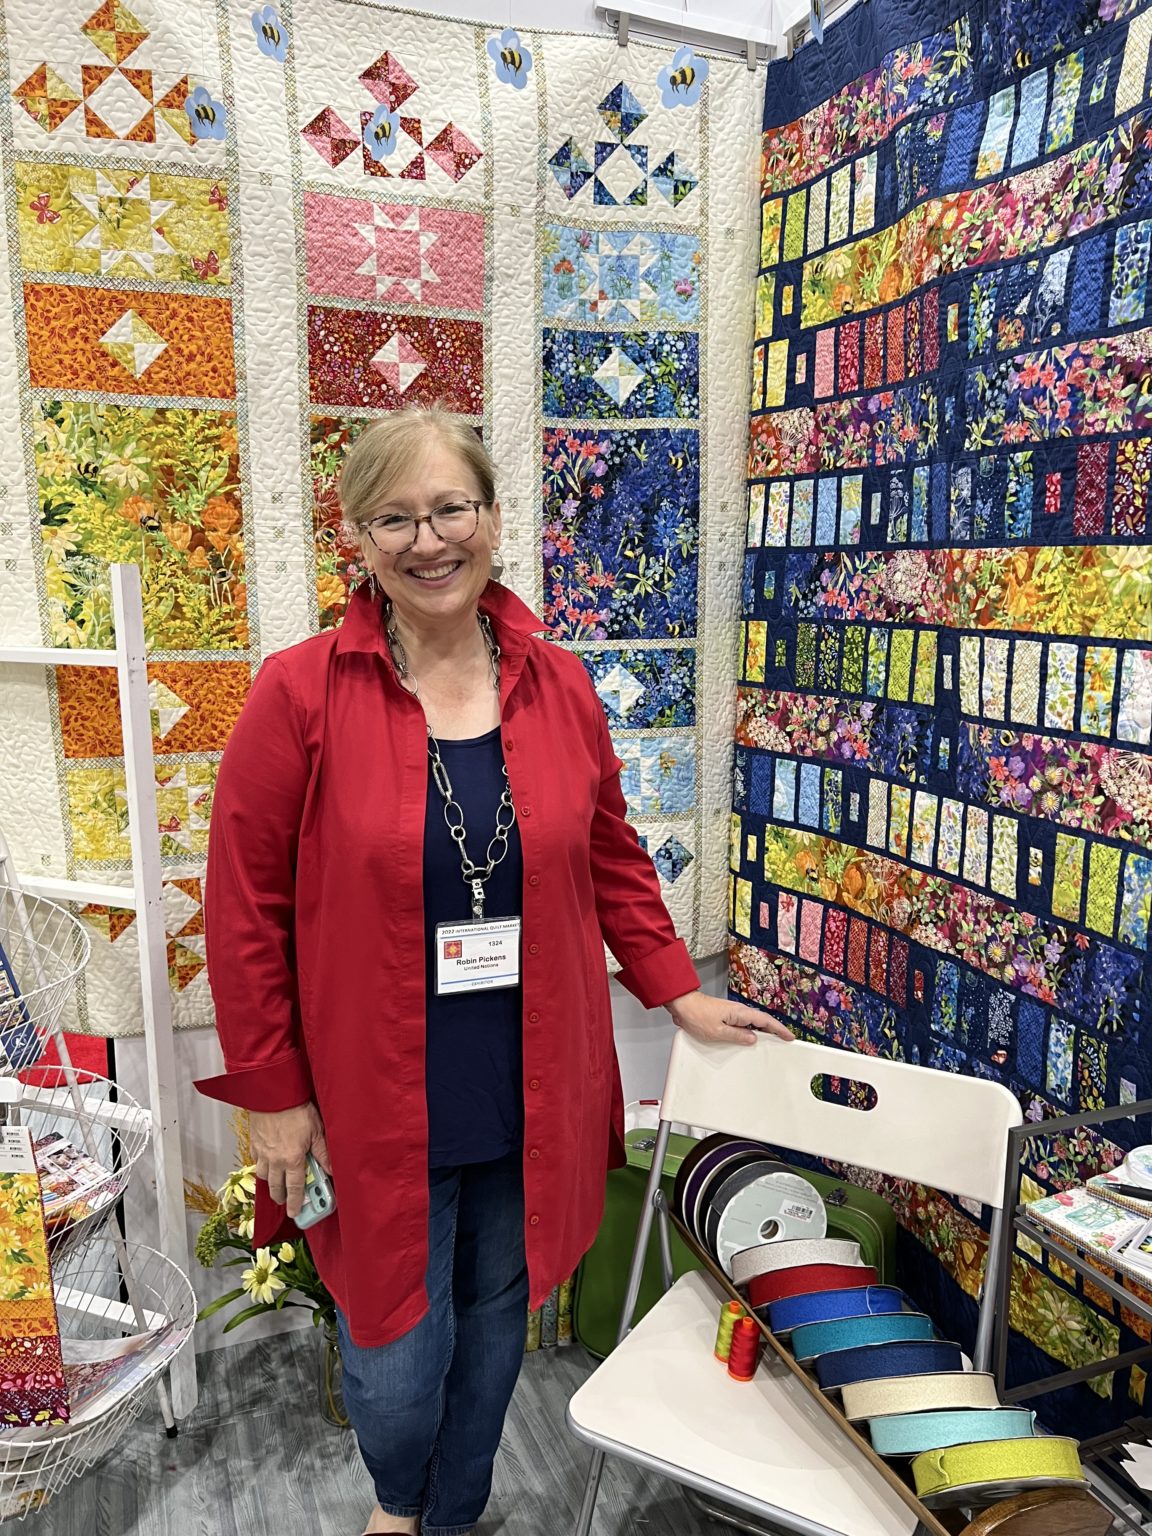 Robin Pickens was showing off her colorful and bright quilts made with ...